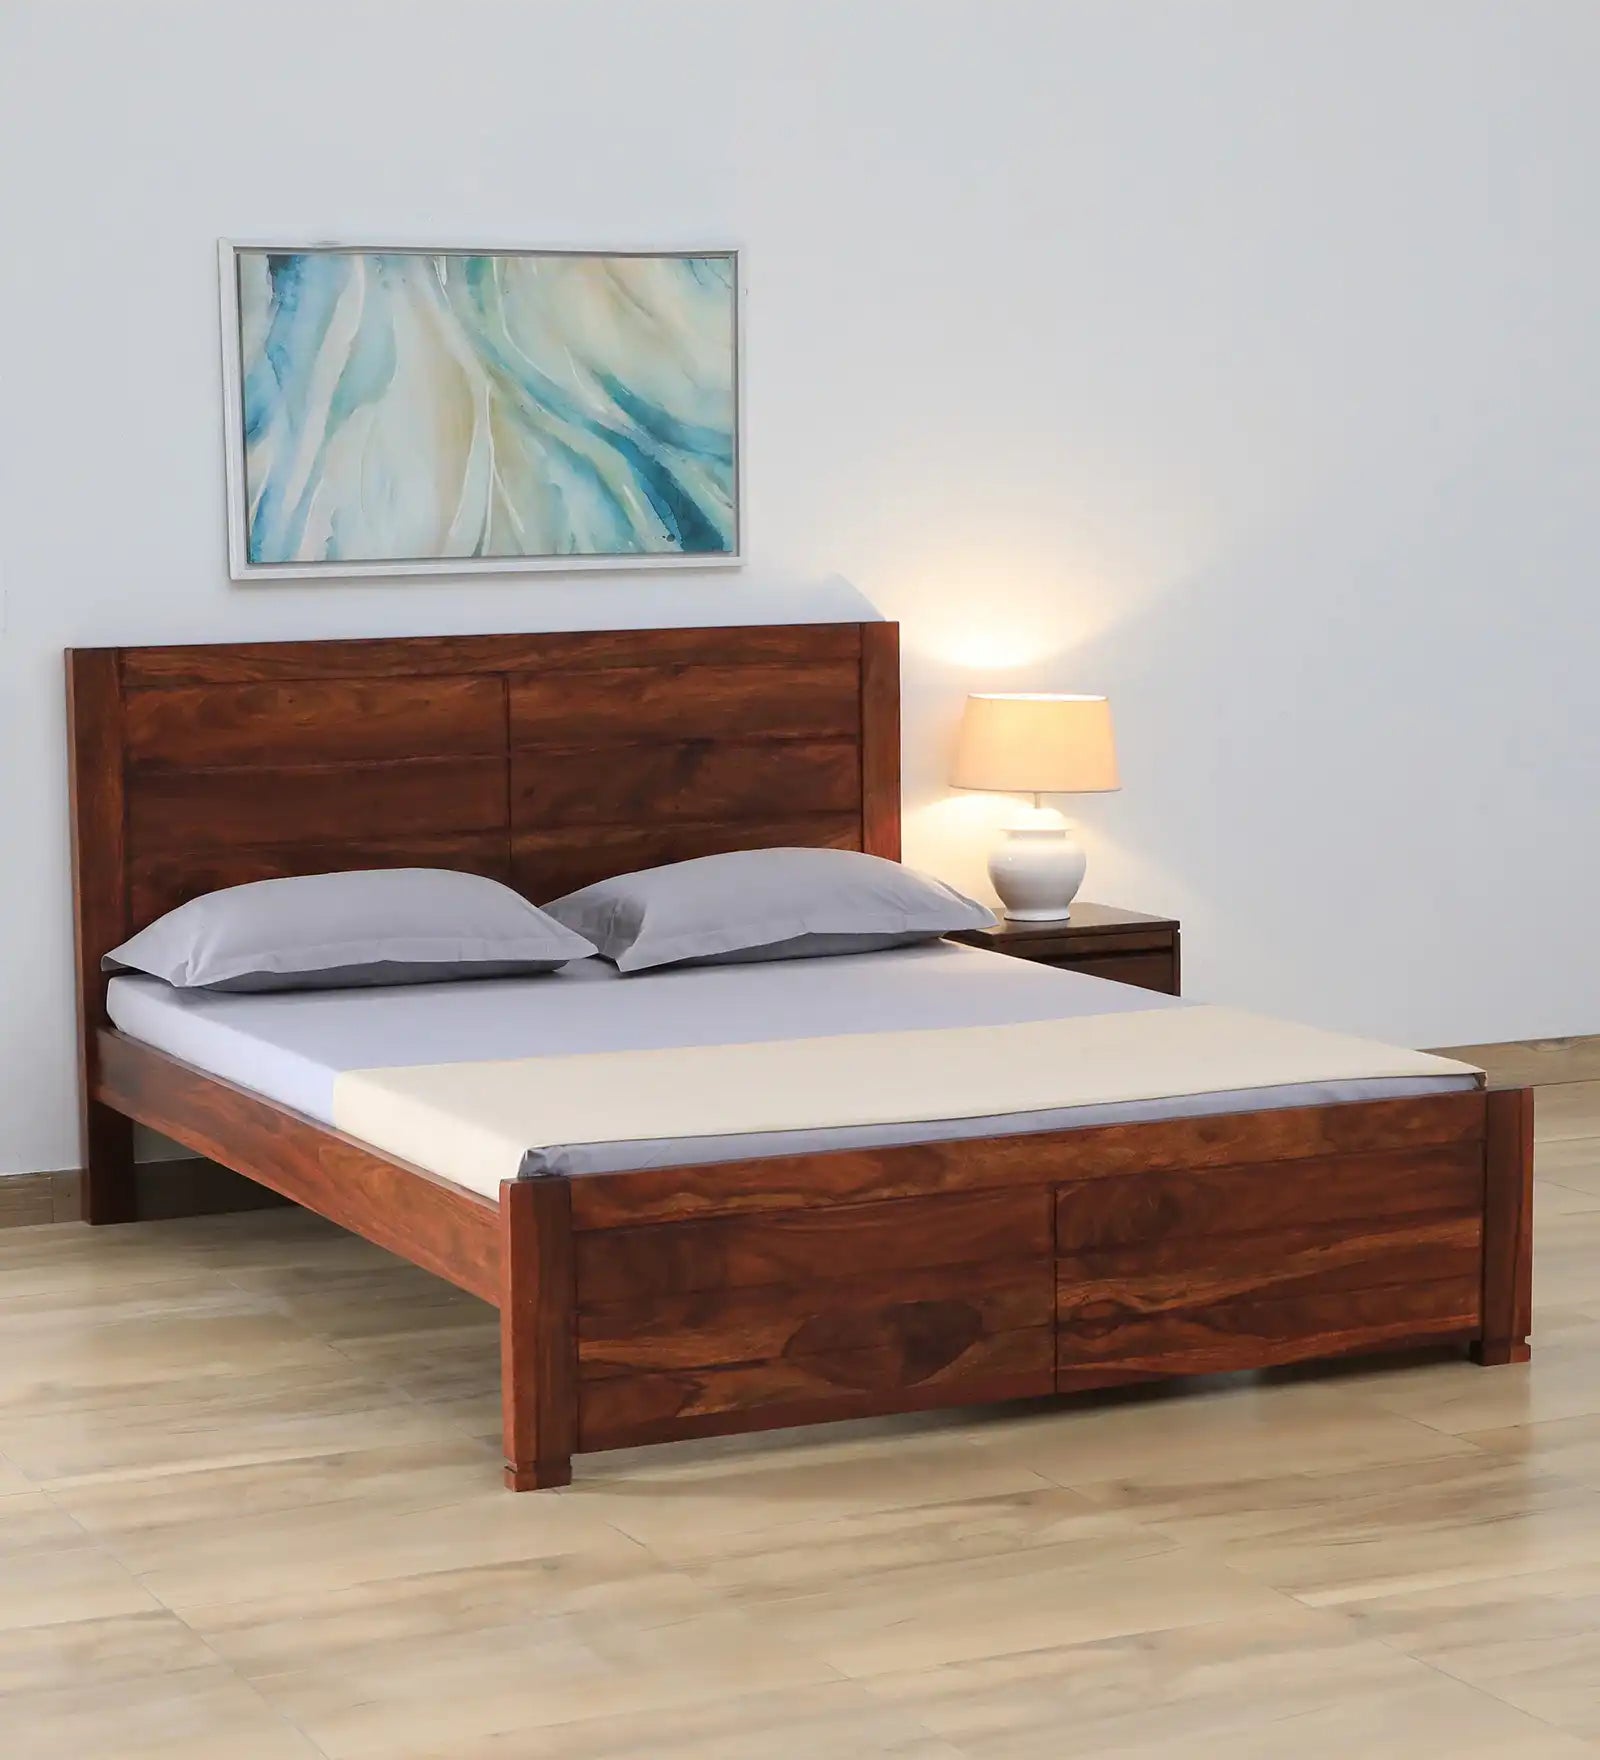 Moscow Contemporary Sheesham Wood Beds